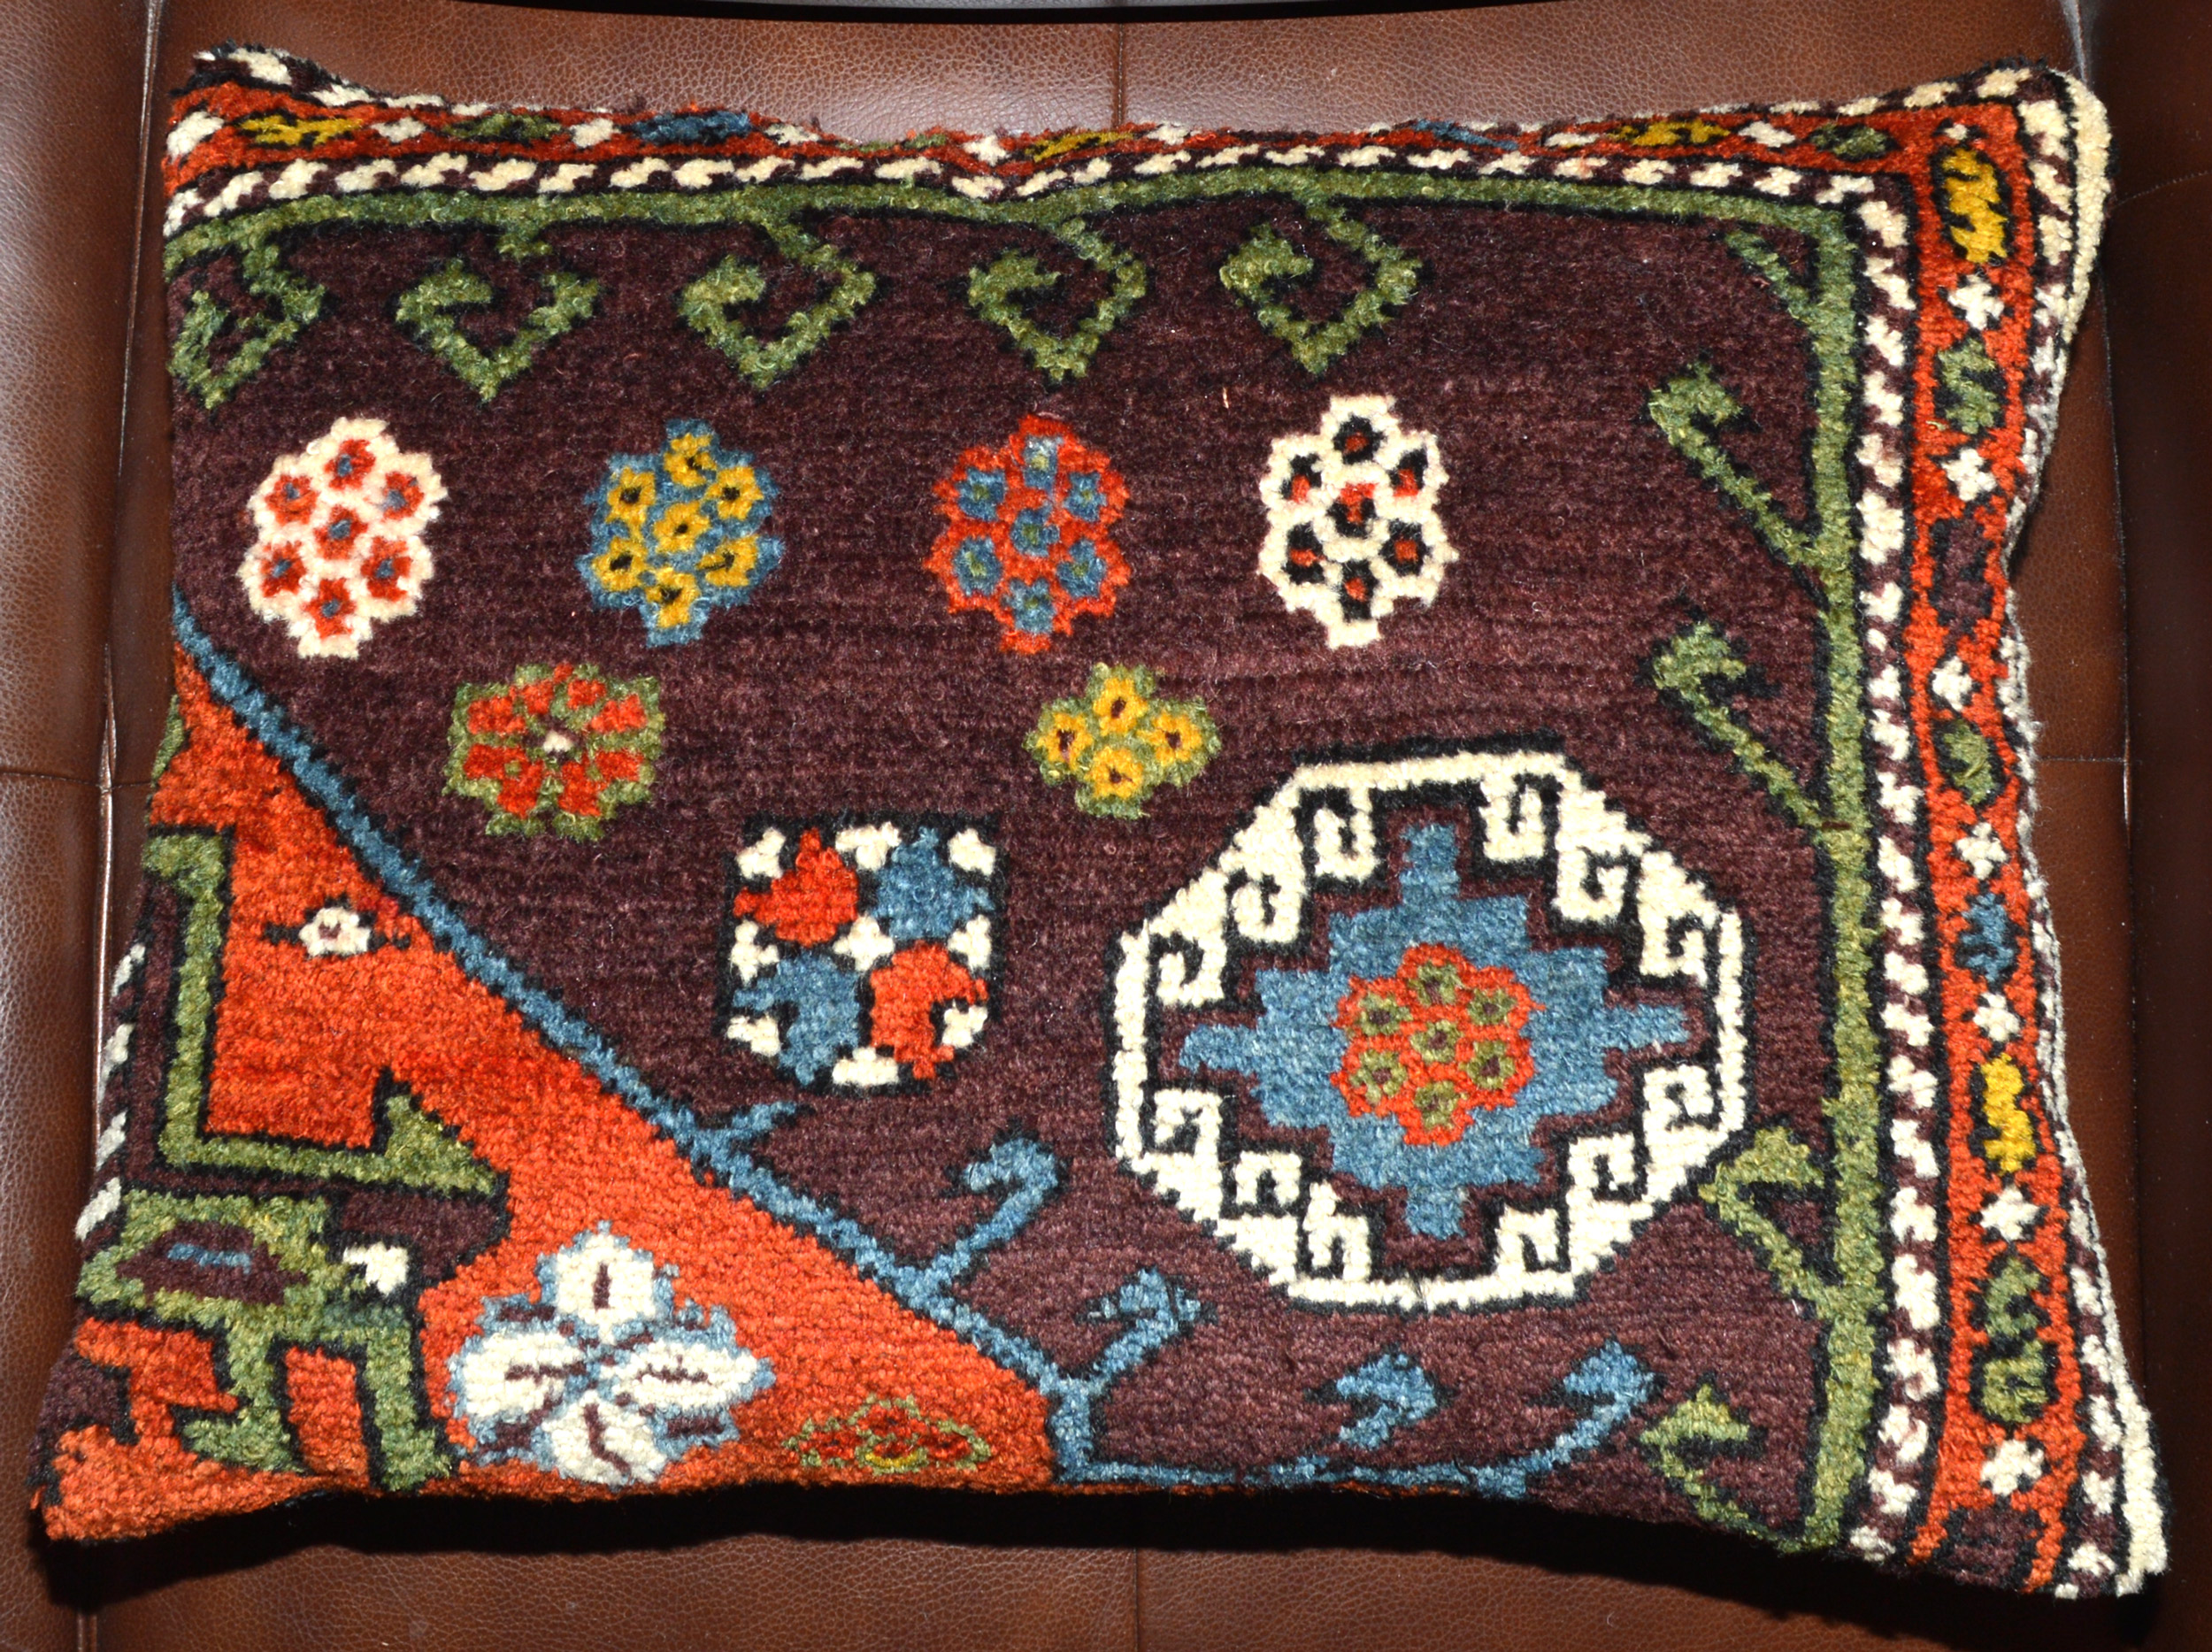 21" x 15" antique Turkish rug fragment pillow # 6, made from a fragment of a 19th century Turkish Canakkale / Bergama rug with an aubergine color field and decorated with a Memling Gul, Douglas Stock Gallery, antique Oriental rugs Boston, Brookline, Weston, Newton, Wellesley, Needham, Dover, Sherborn, South Natick MA area